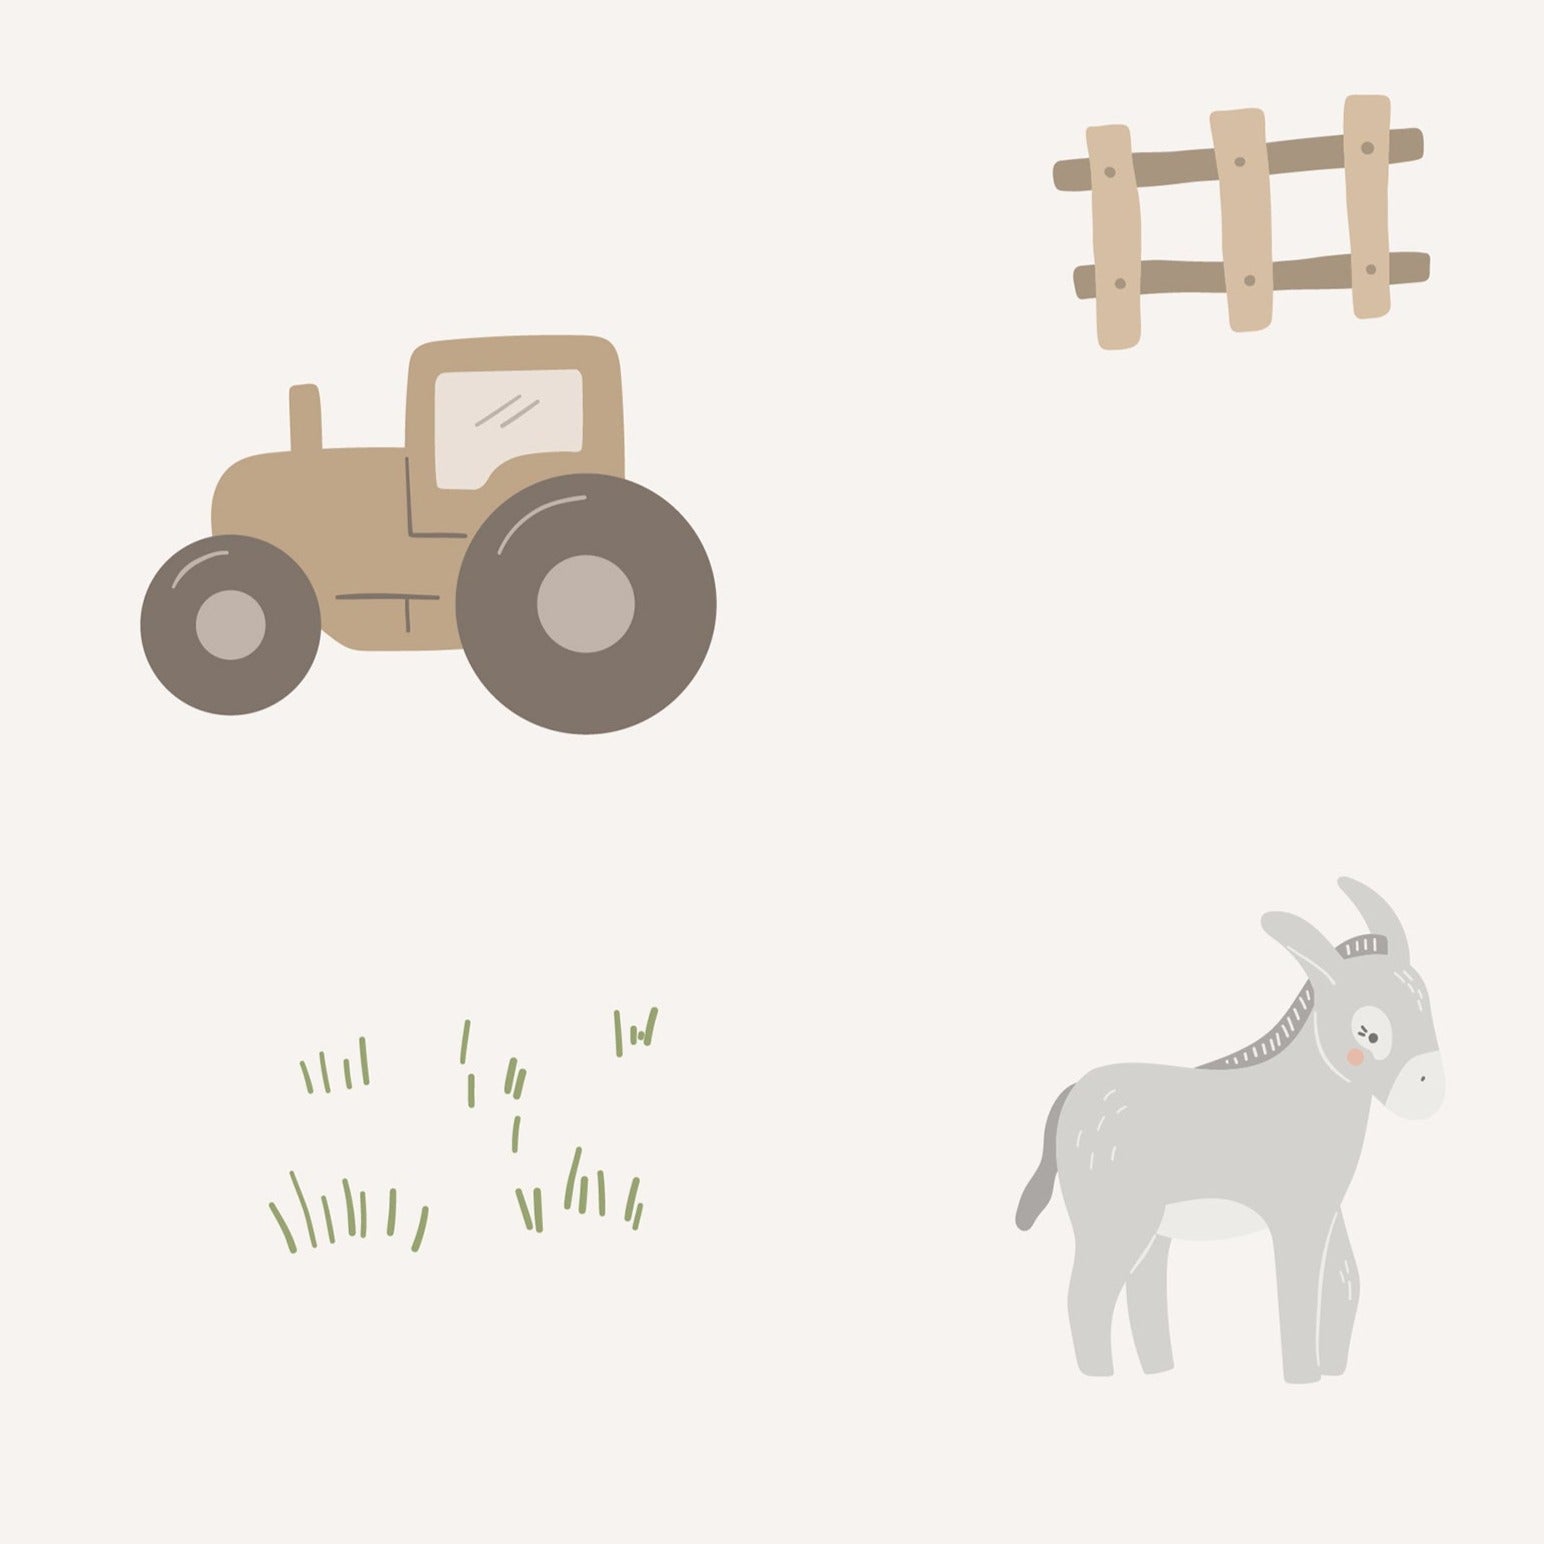 Seamless wallpaper pattern with charming illustrations of farm animals like horses and cows, along with barns, tractors, and windmills, all depicted in muted earth tones on a light background, perfect for a child's room or nursery.